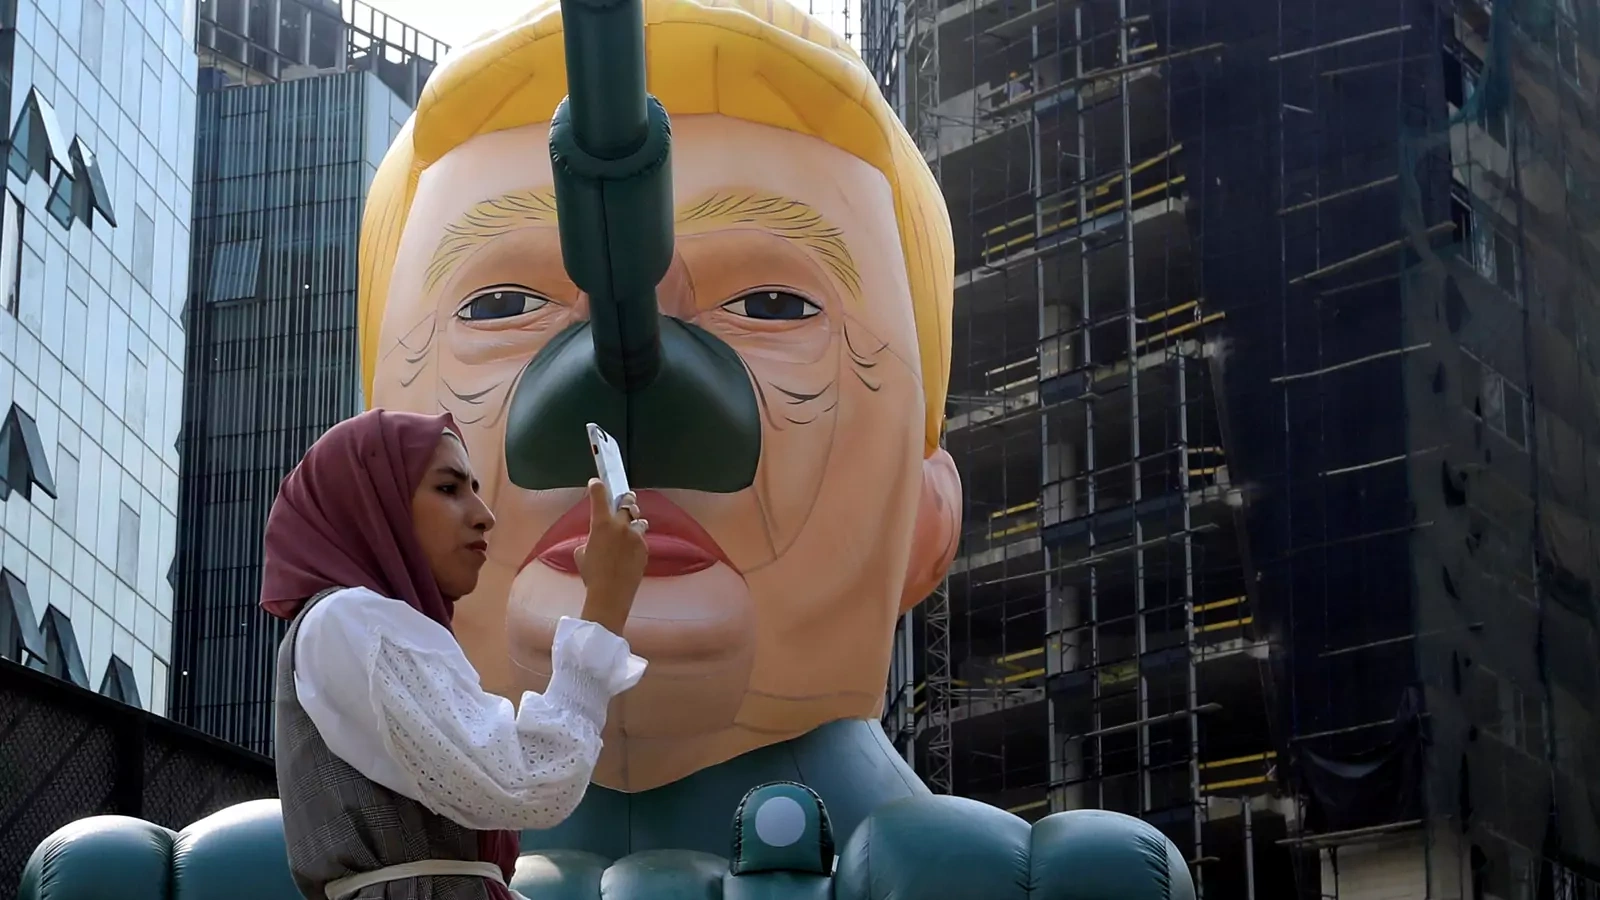 A woman stands next to an inflatable tank with U.S. President Donald Trump outside an art exhibition 'MonuMental' by the pseudonymous artist, Saint Hoax in downtown Beirut, Lebanon October 12, 2018